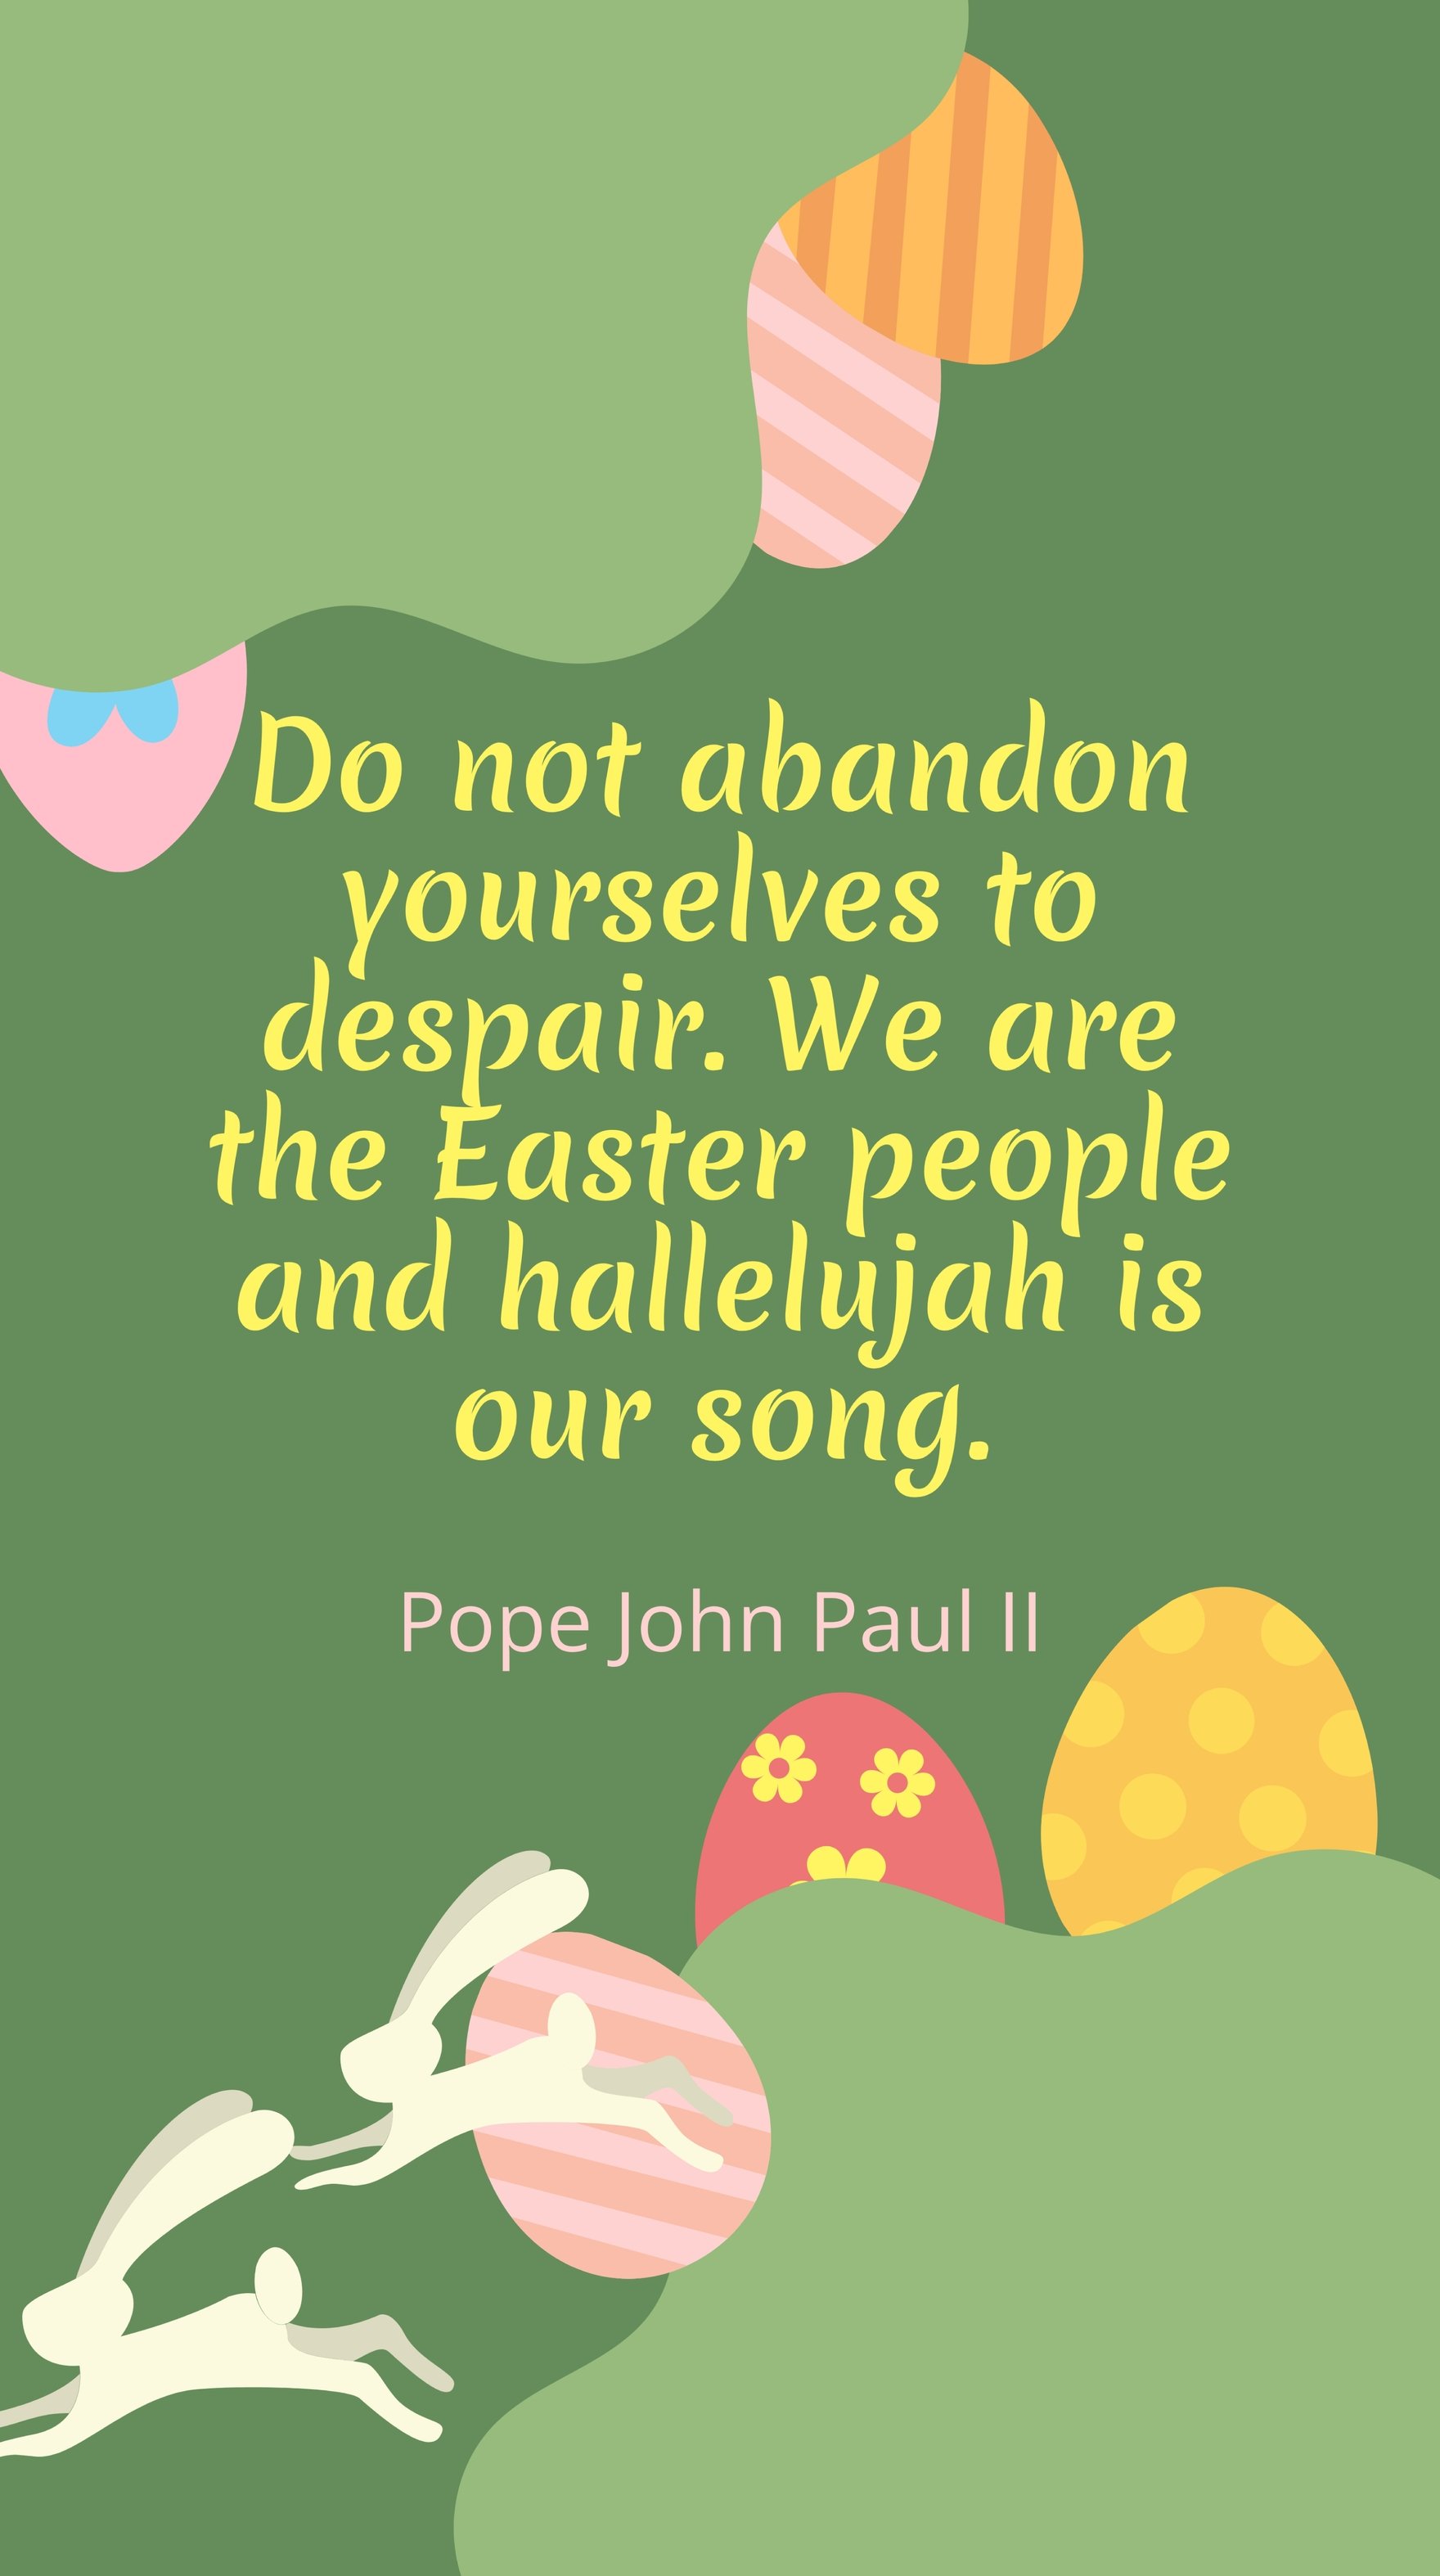 Free Pope John Paul II - Do not abandon yourselves to despair. We are the Easter people and hallelujah is our song. in JPG